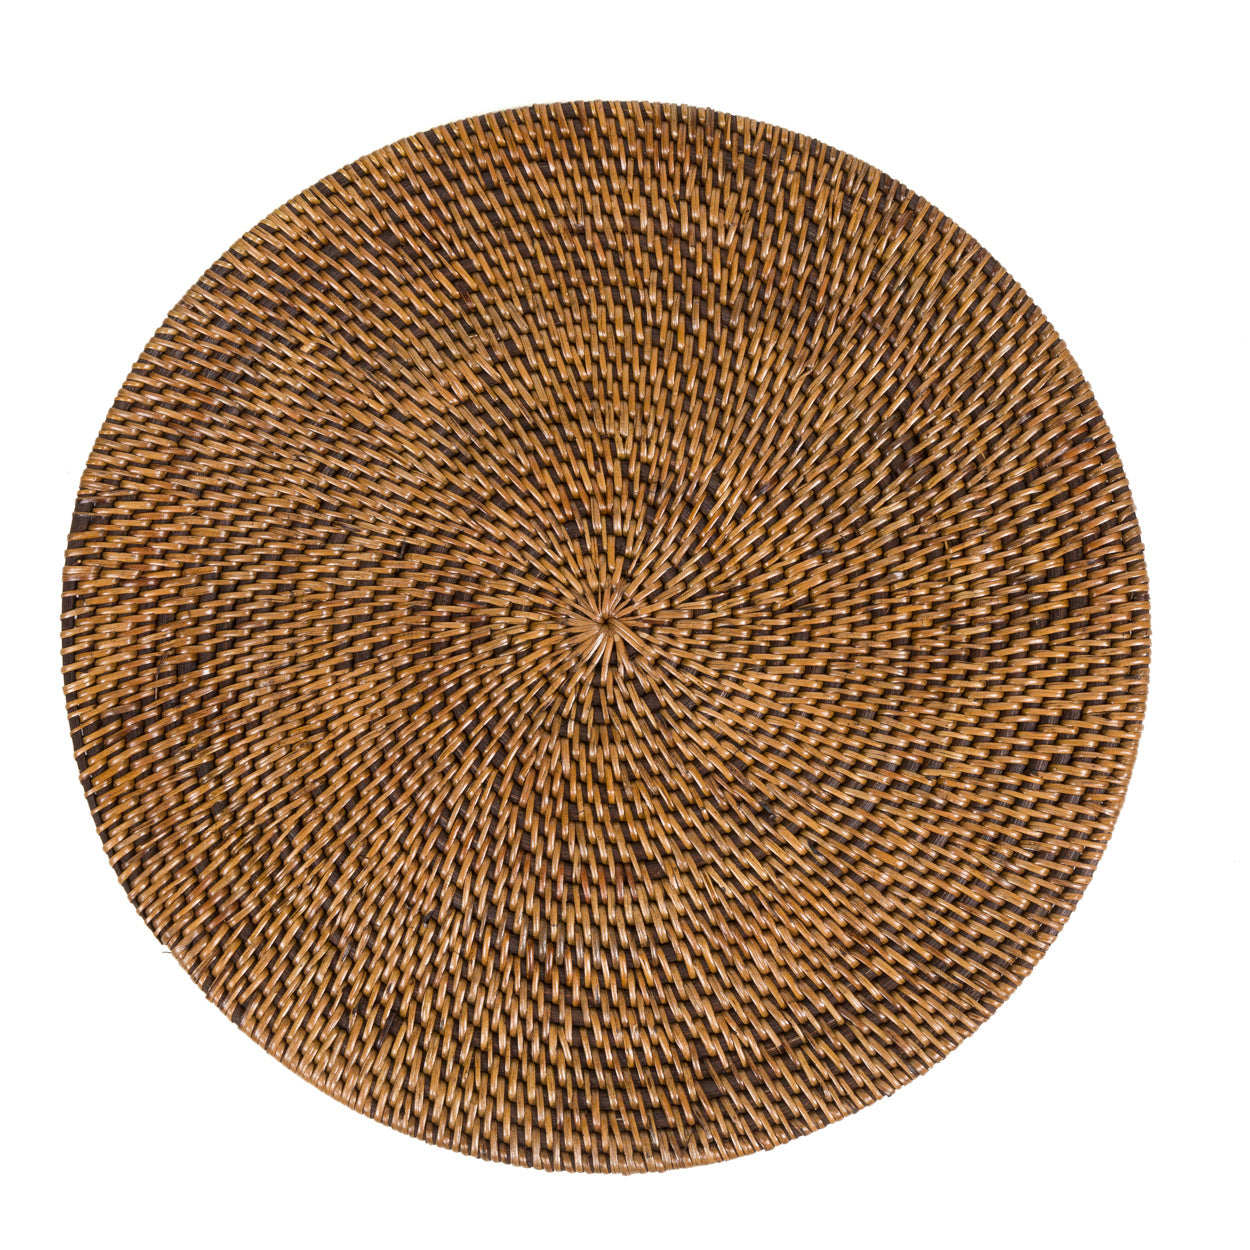 THE COLONIAL Placemat Natural-Brown front view